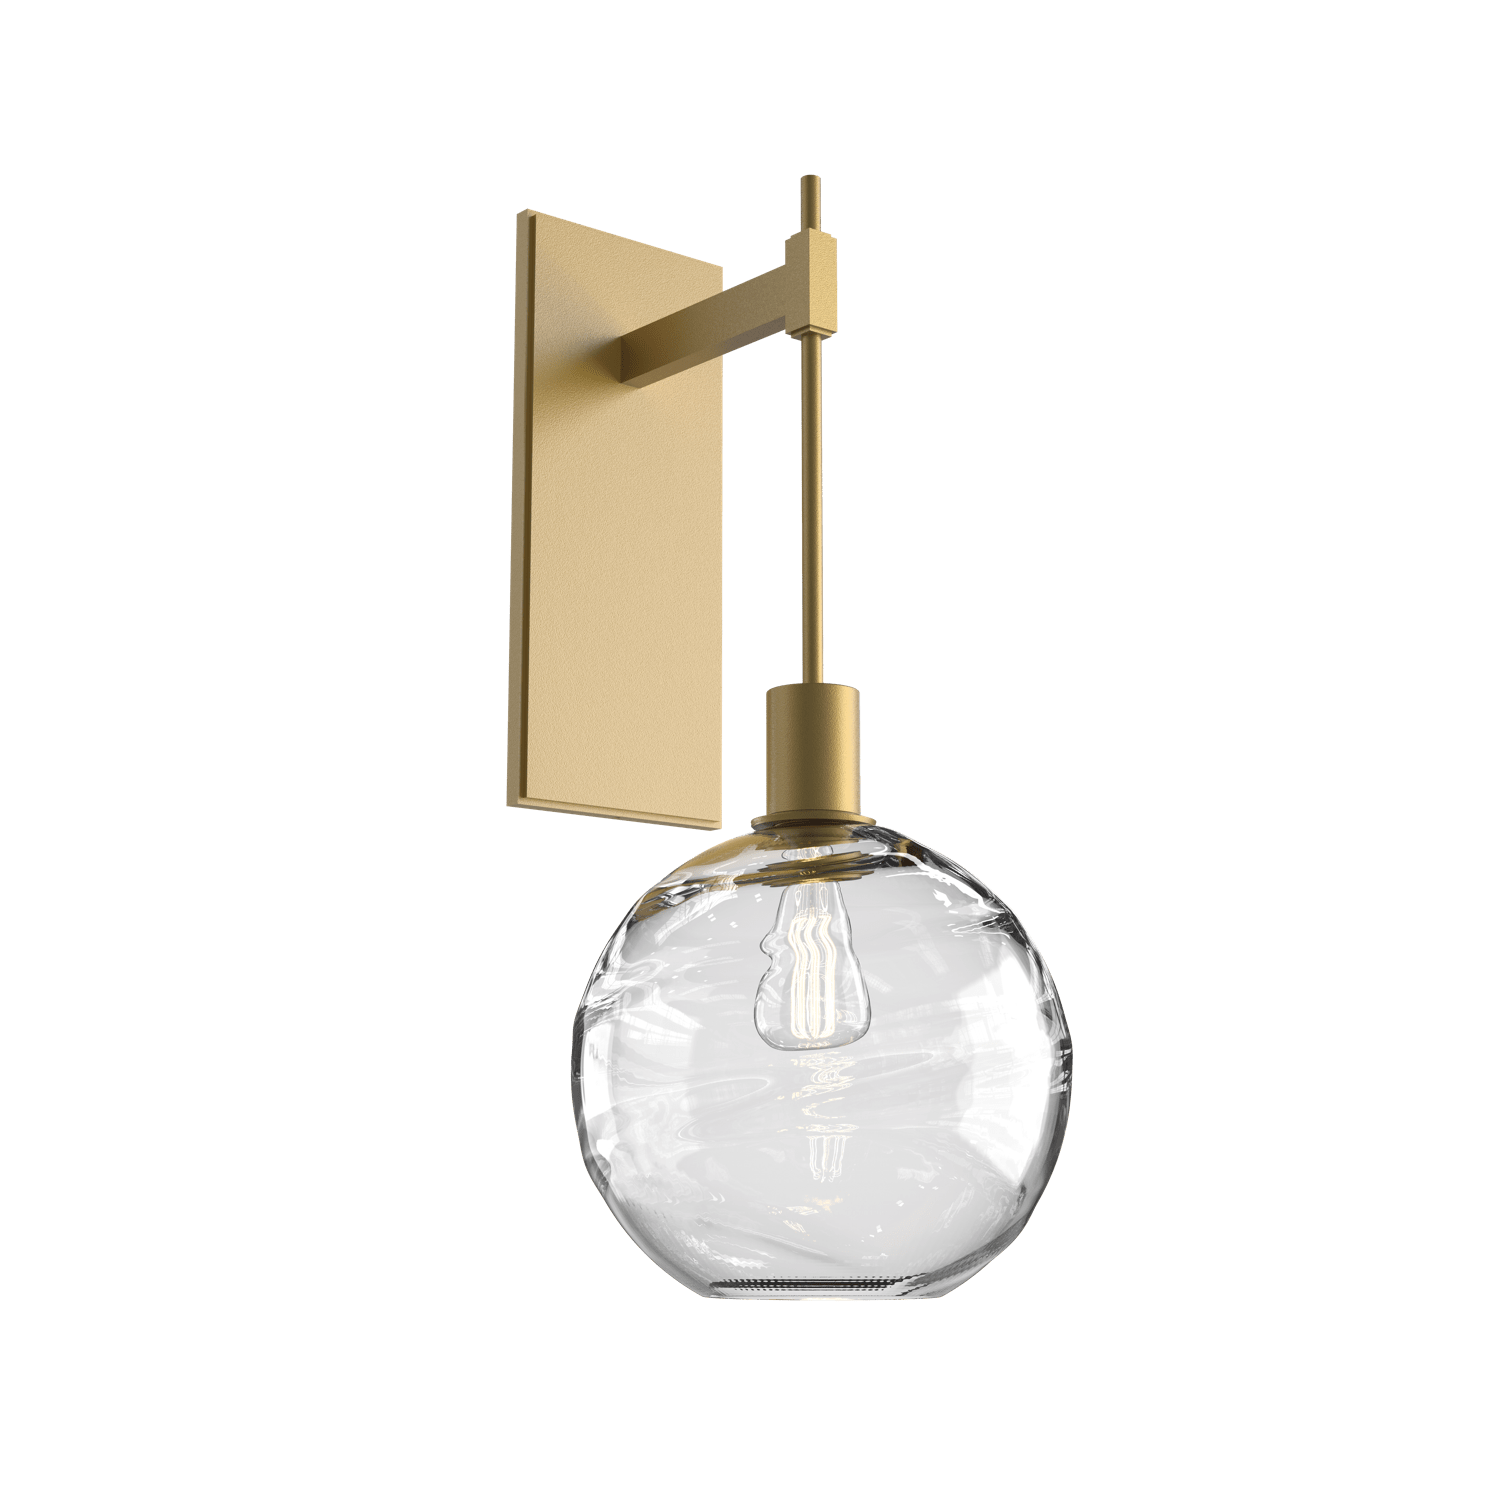 IDB0047-22-GB-OC-Hammerton-Studio-Optic-Blown-Glass-Terra-tempo-wall-sconce-with-gilded-brass-finish-and-optic-clear-blown-glass-shades-and-incandescent-lamping